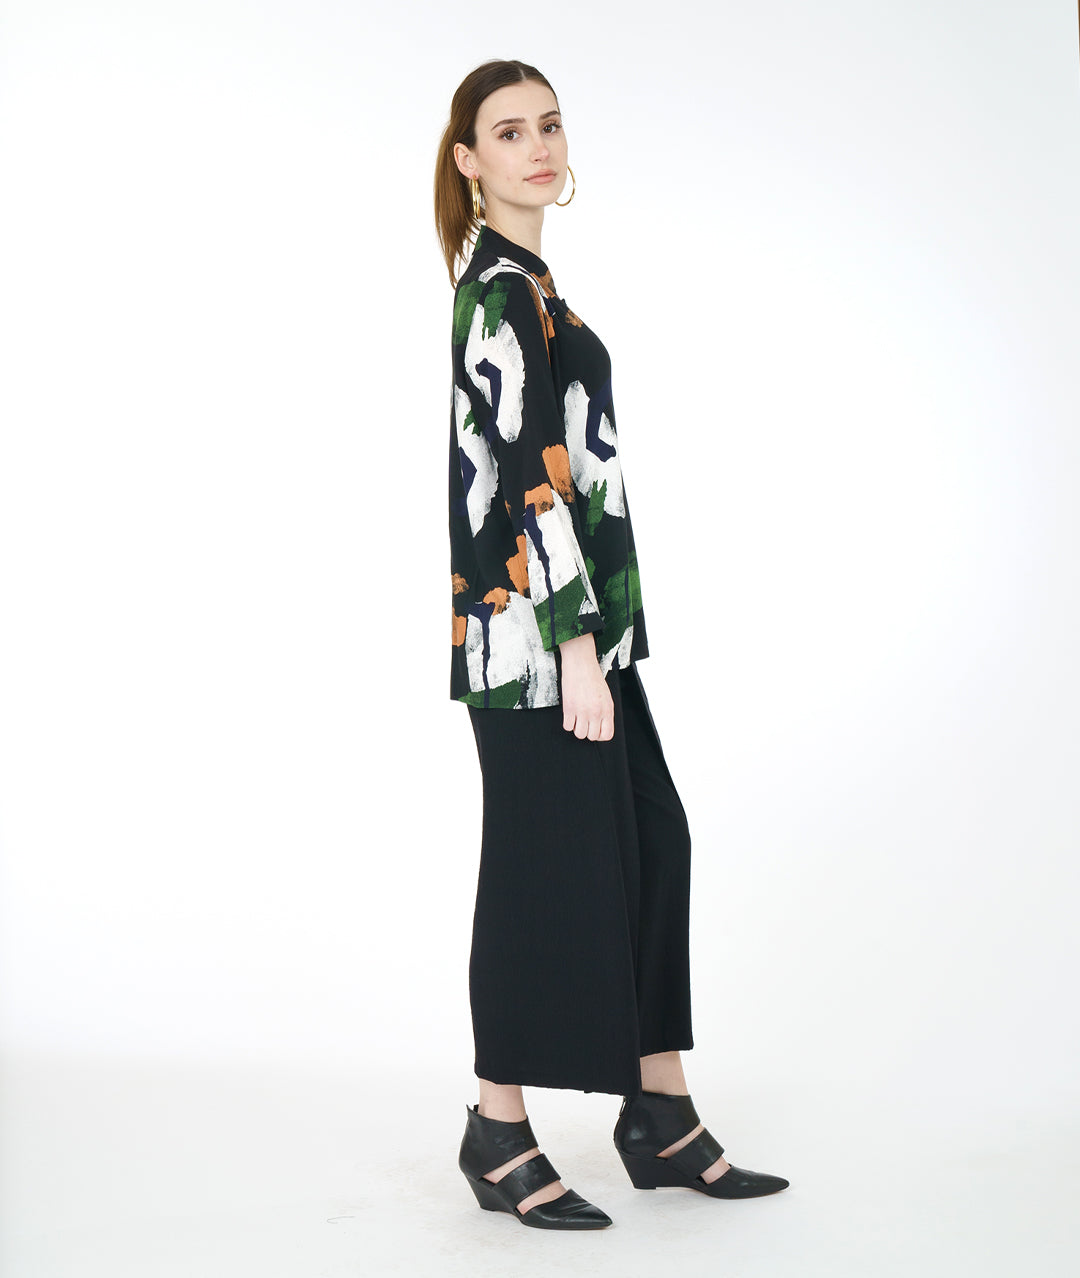 model in a wide leg black pant with a black button down blouse with a green, white and orange paint stroke print